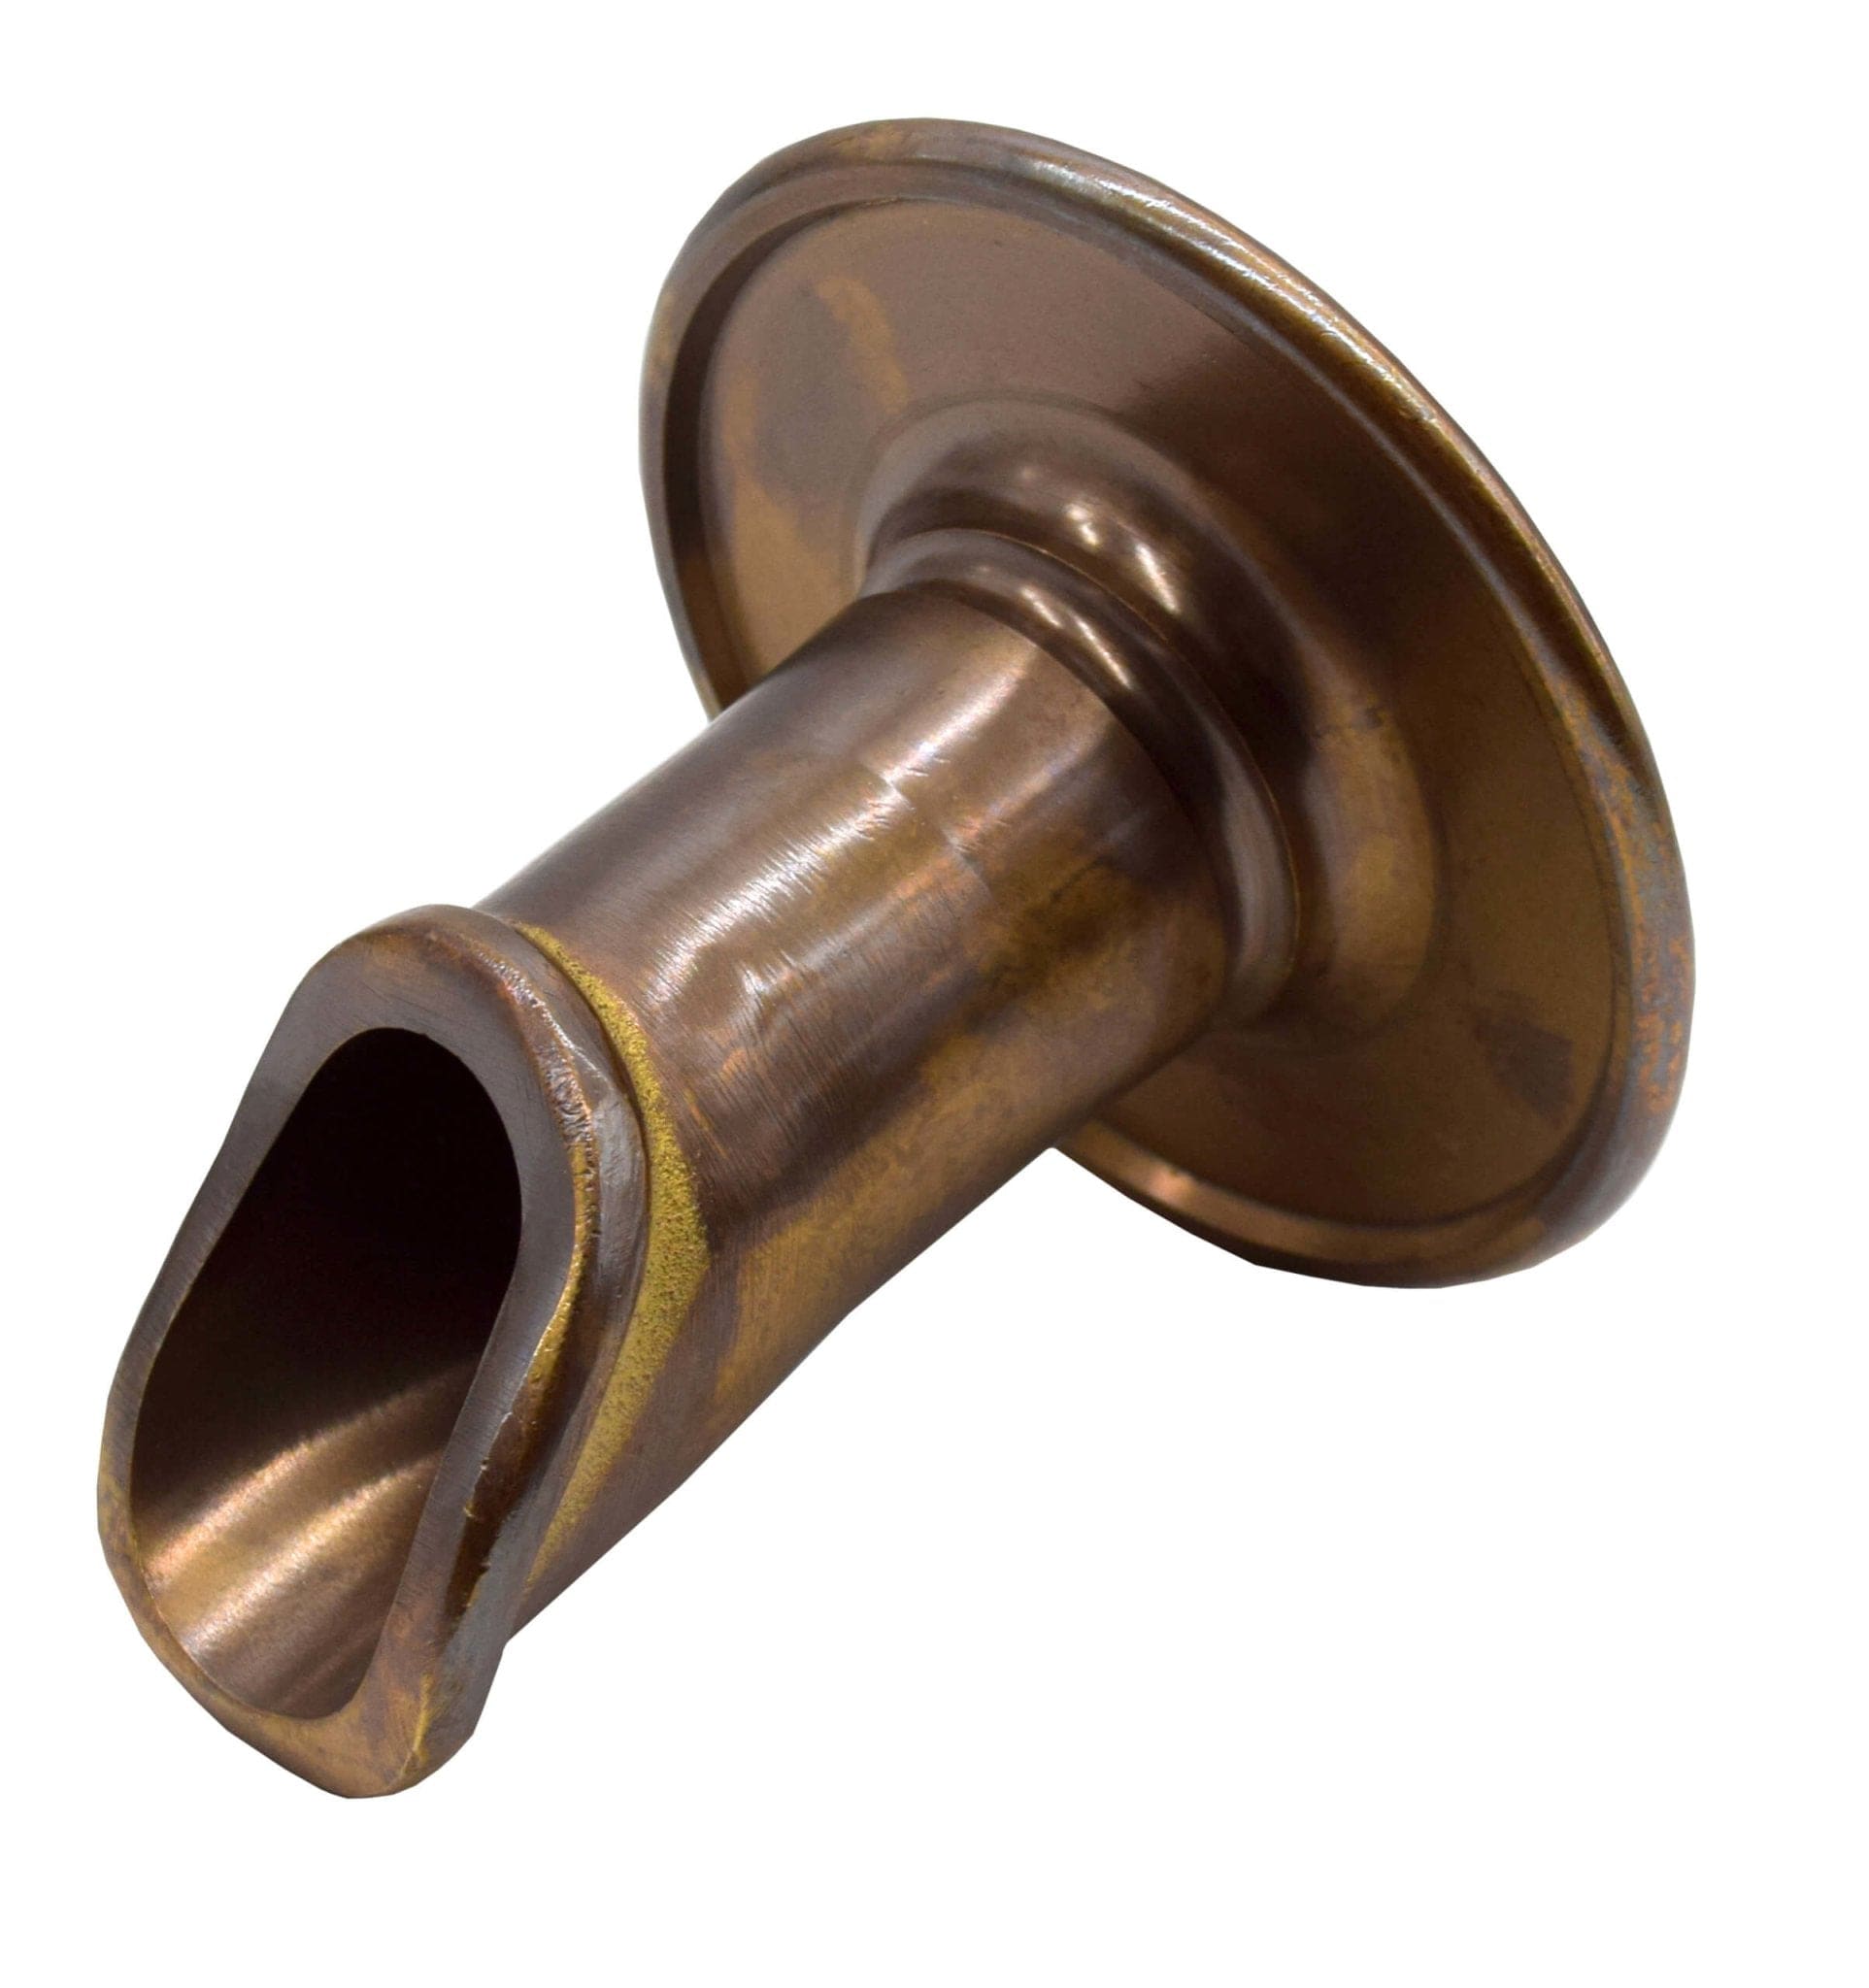 EasyPro Fountain Basalt Vianti Falls Brass Antique Scupper with Round Wall Plate - 2-in.